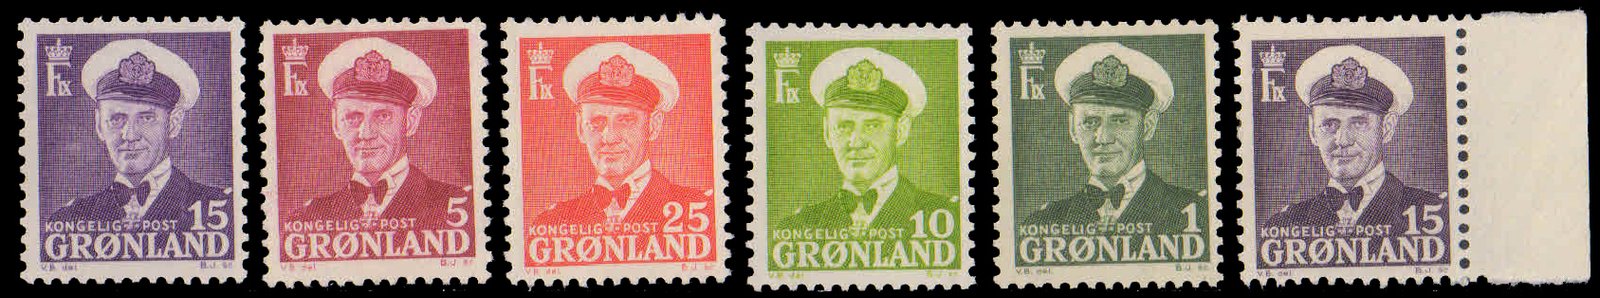 GREENLAND 1950-King Frederik IX, Set of 6 with both shade of 15 Ore, MNH, S.G. 26-30-Cat £ 6-